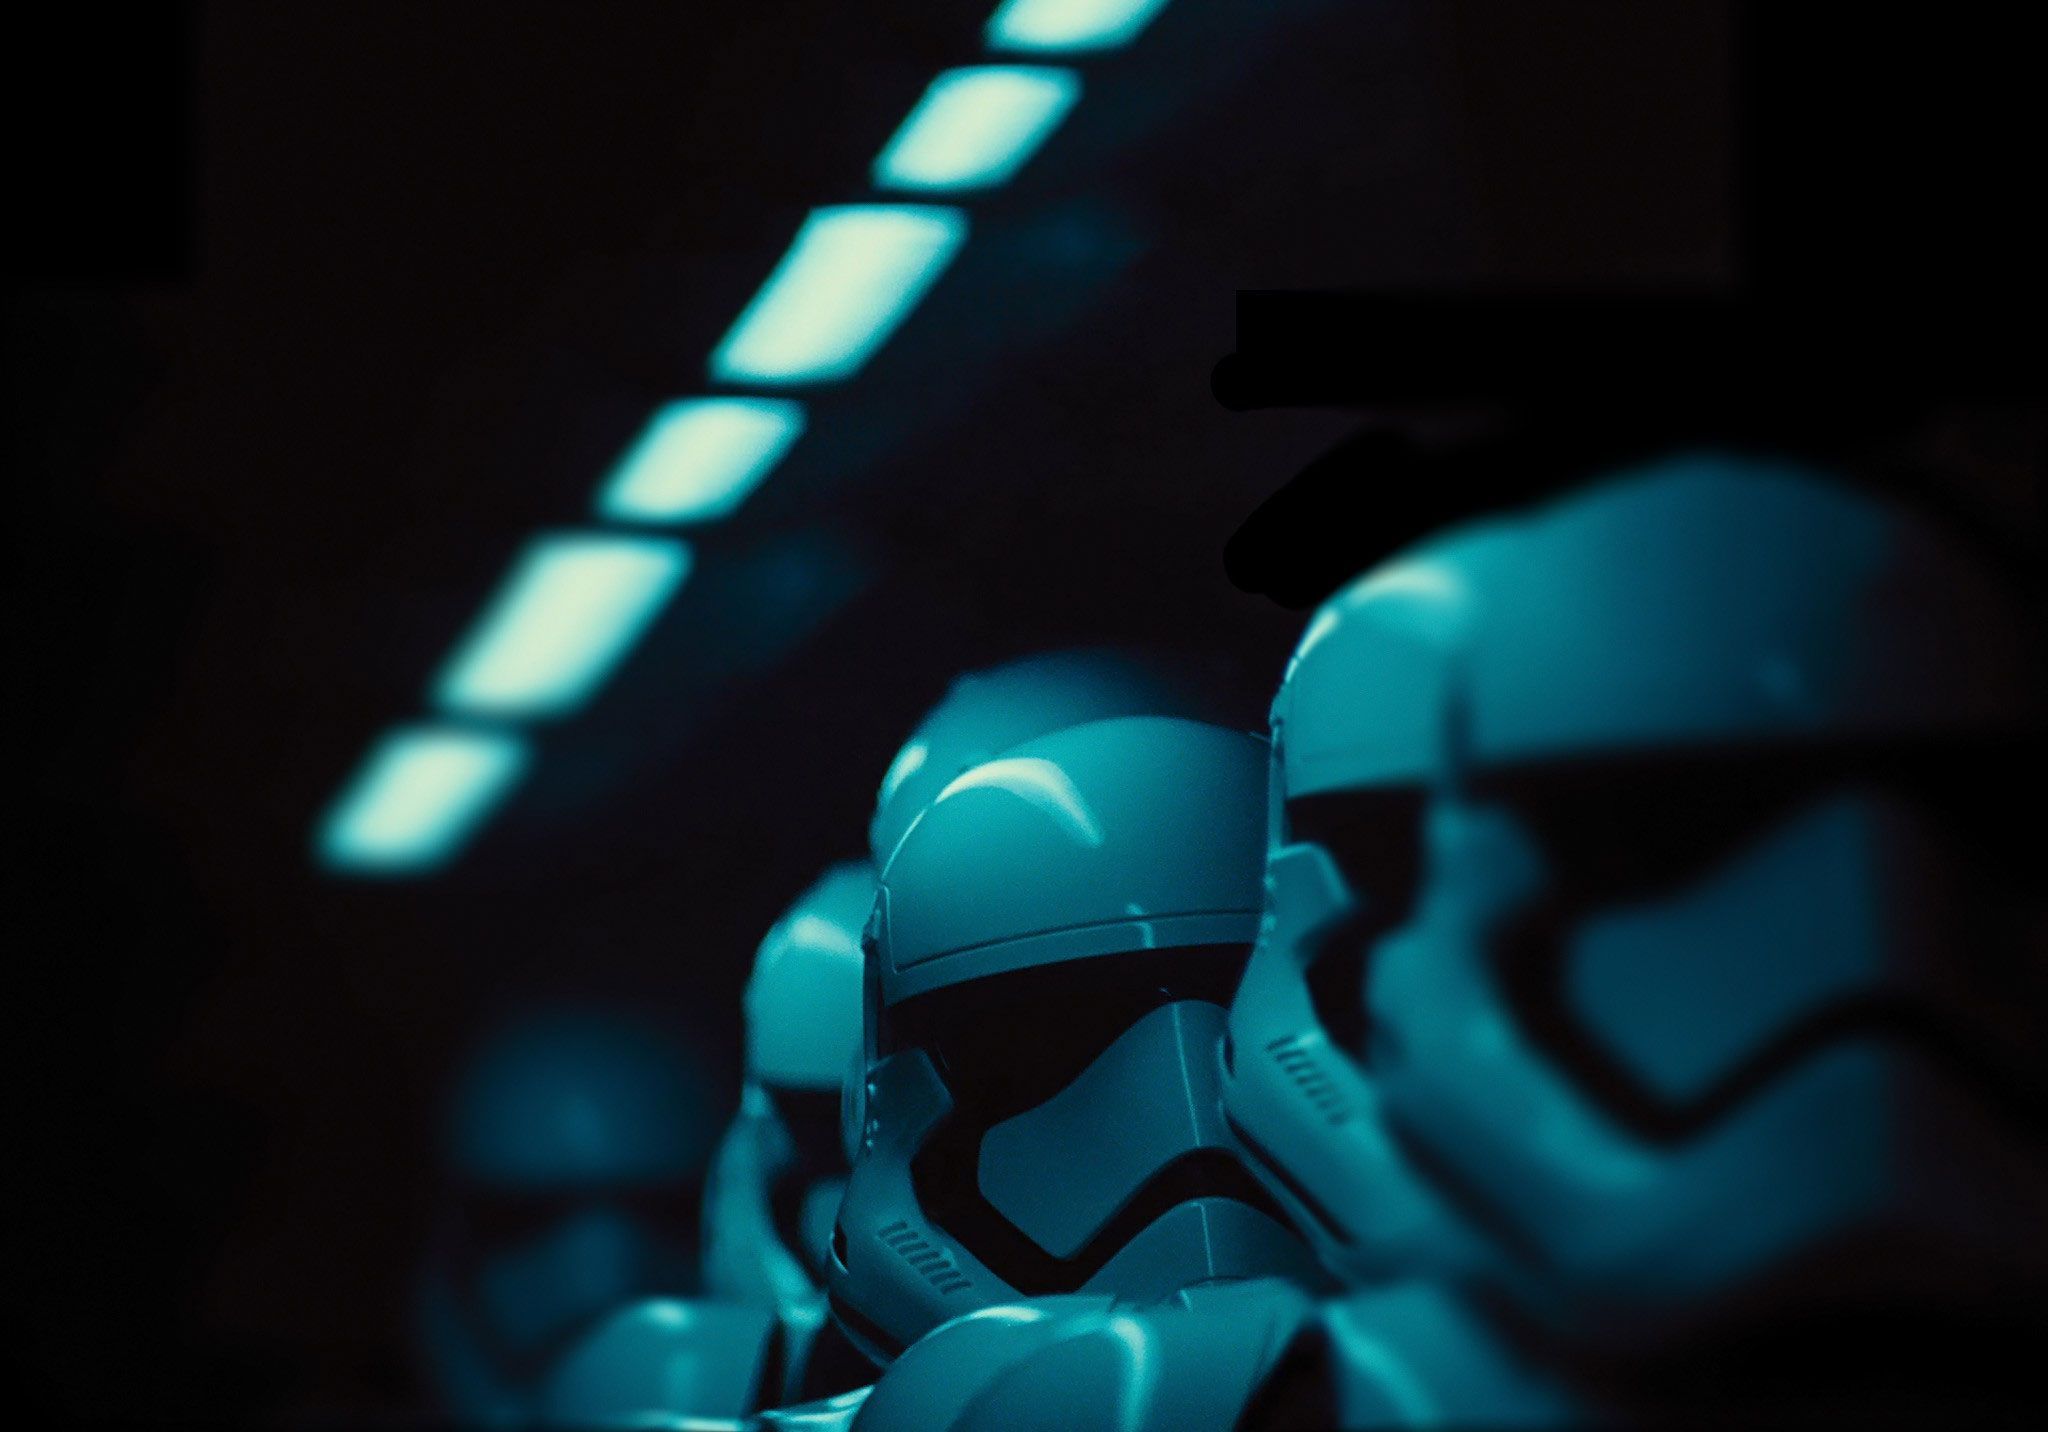 Star Wars: The Force Awakens Wallpaper and Lego Trailer | Collider